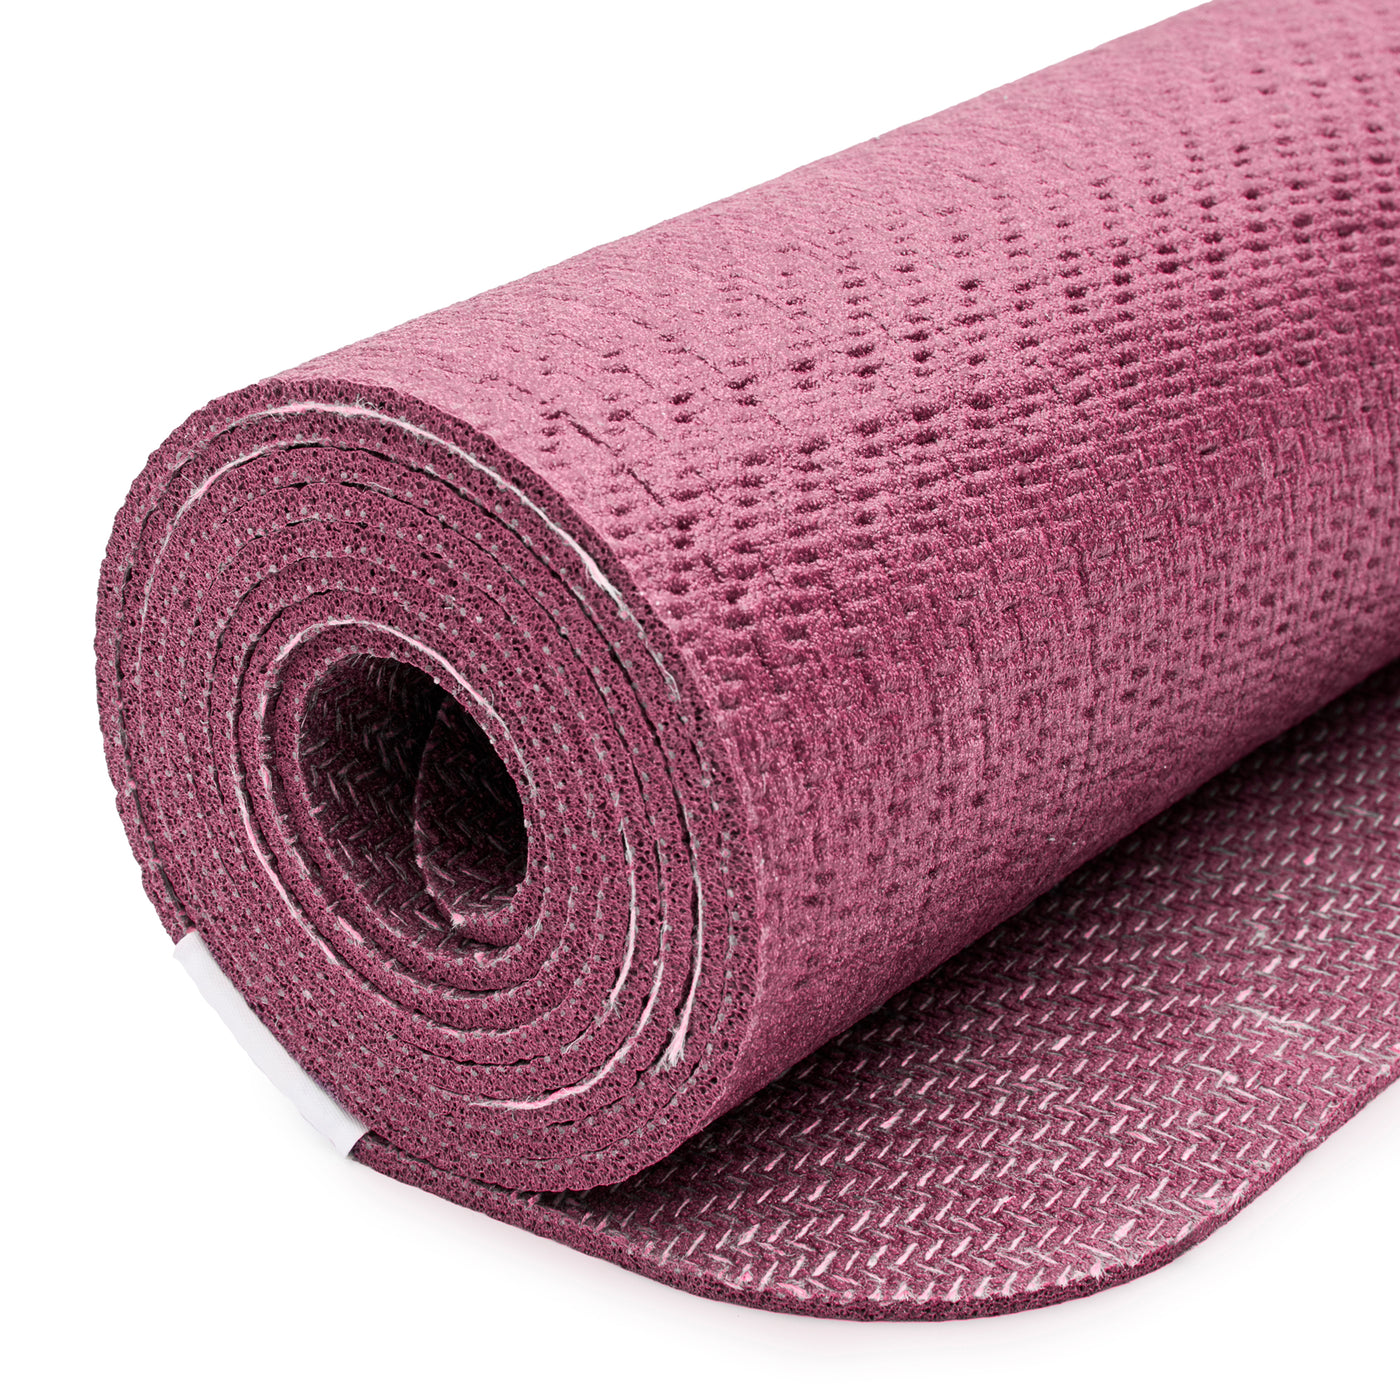 Eco & Ethical  Yoga Mat Strap - Handloom Fabric - pink – Ethical by Nature